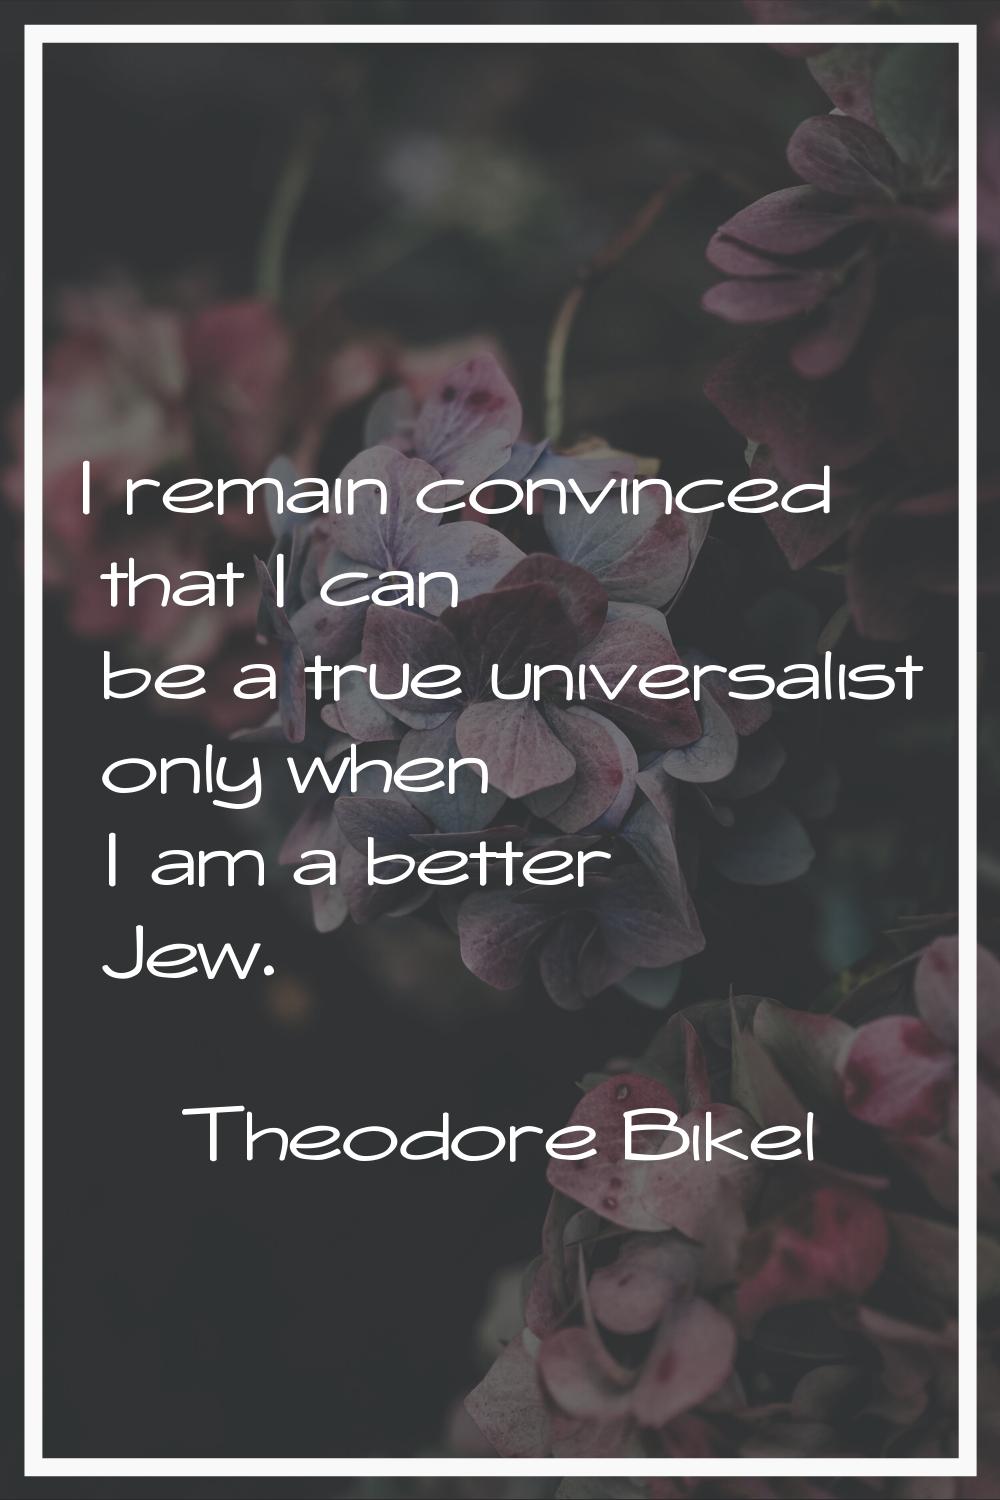 I remain convinced that I can be a true universalist only when I am a better Jew.